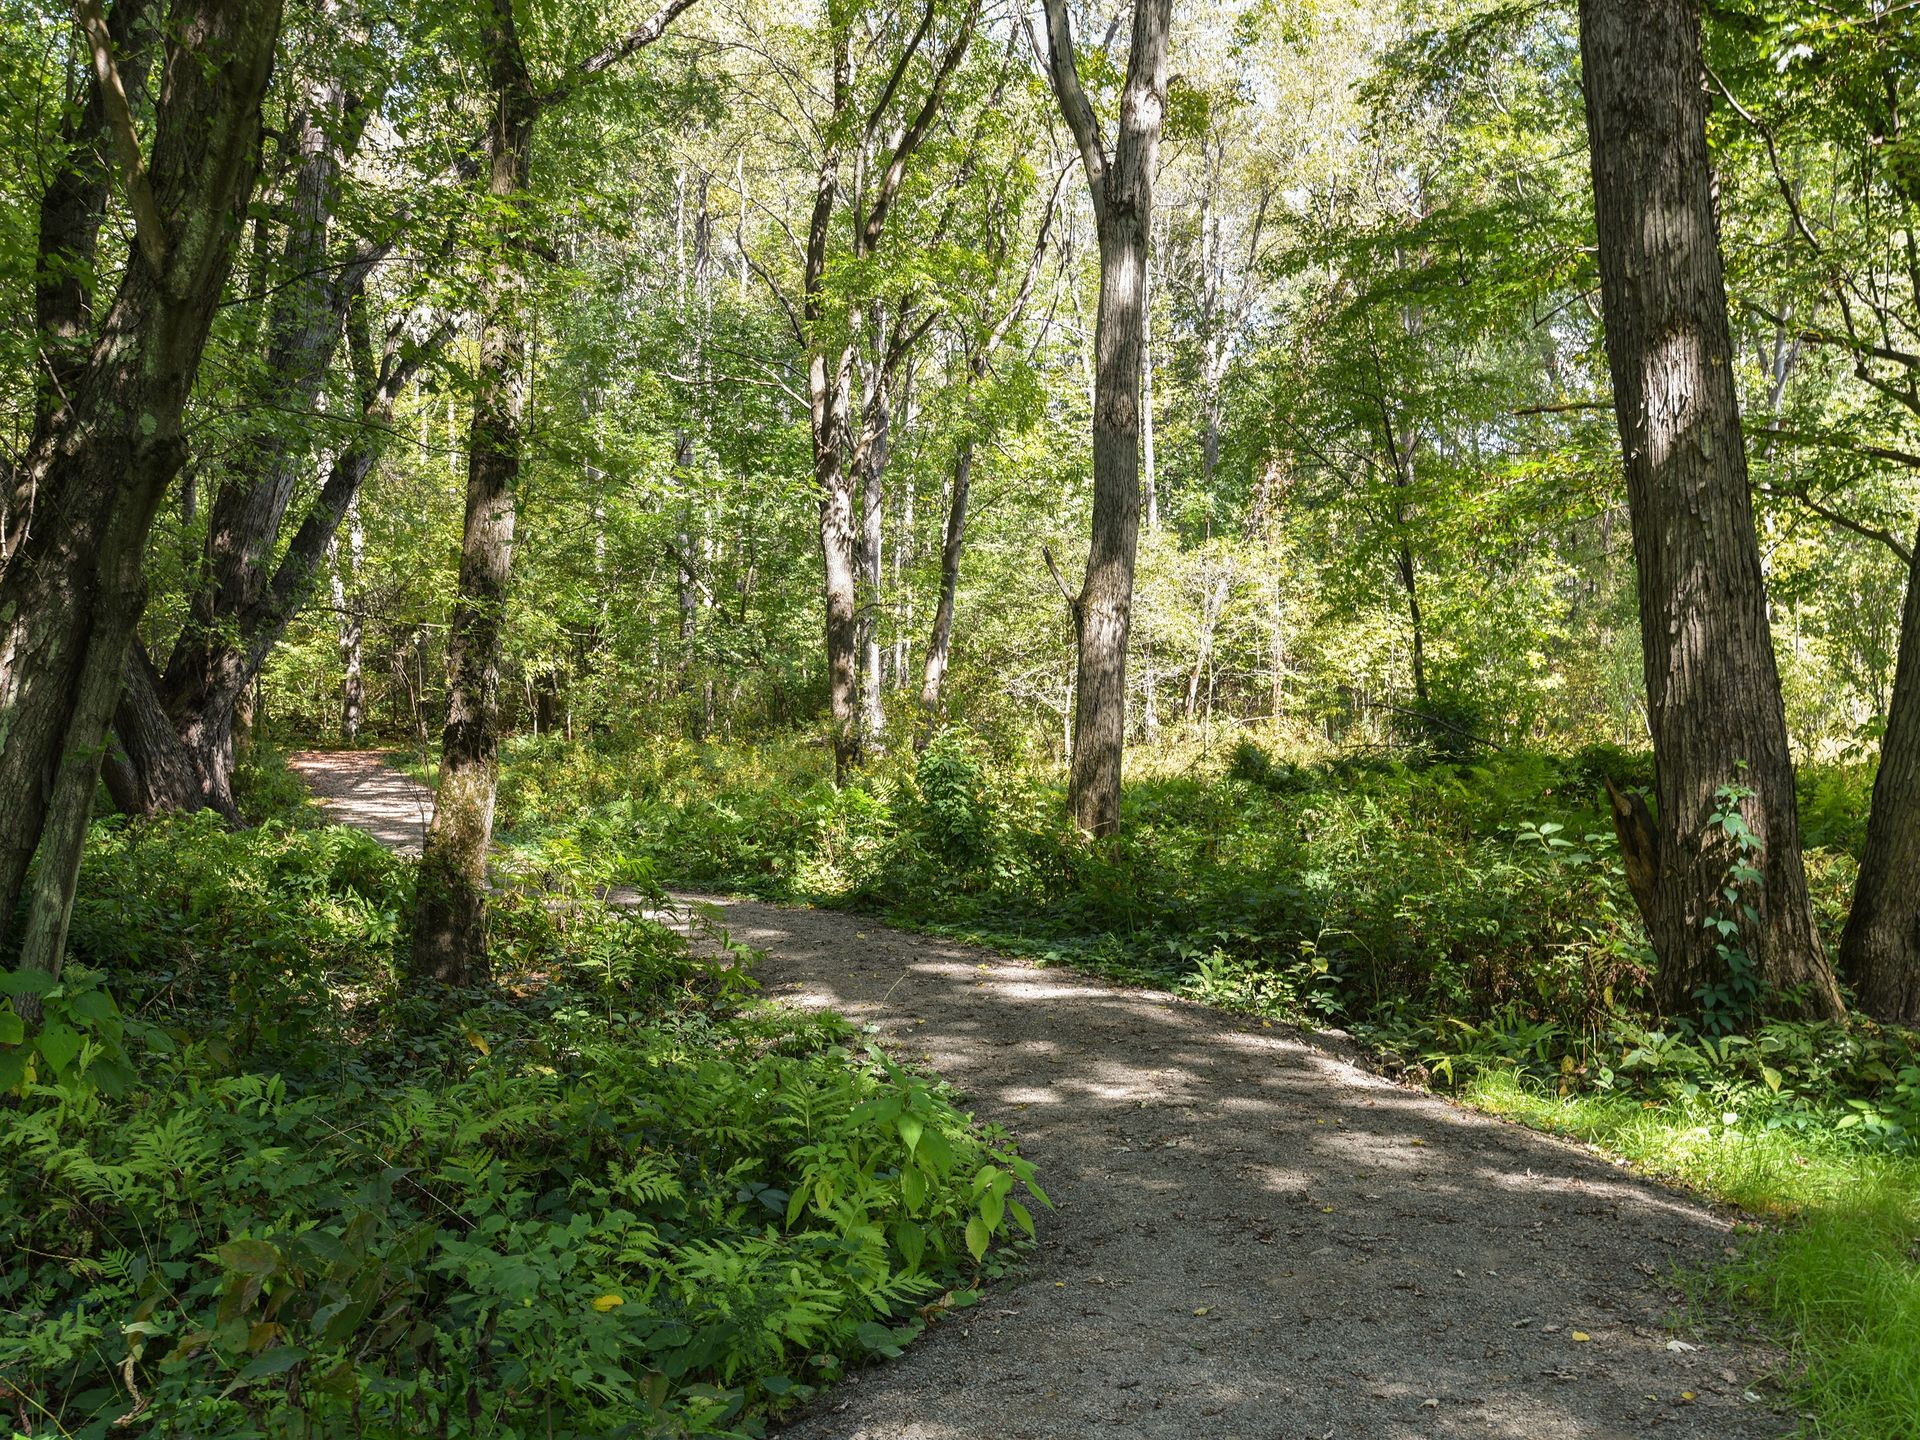 A trail leading through the woods to the Susquehanna River Historic Site, where the first baptisms took place prior to the reorganization of the Church.